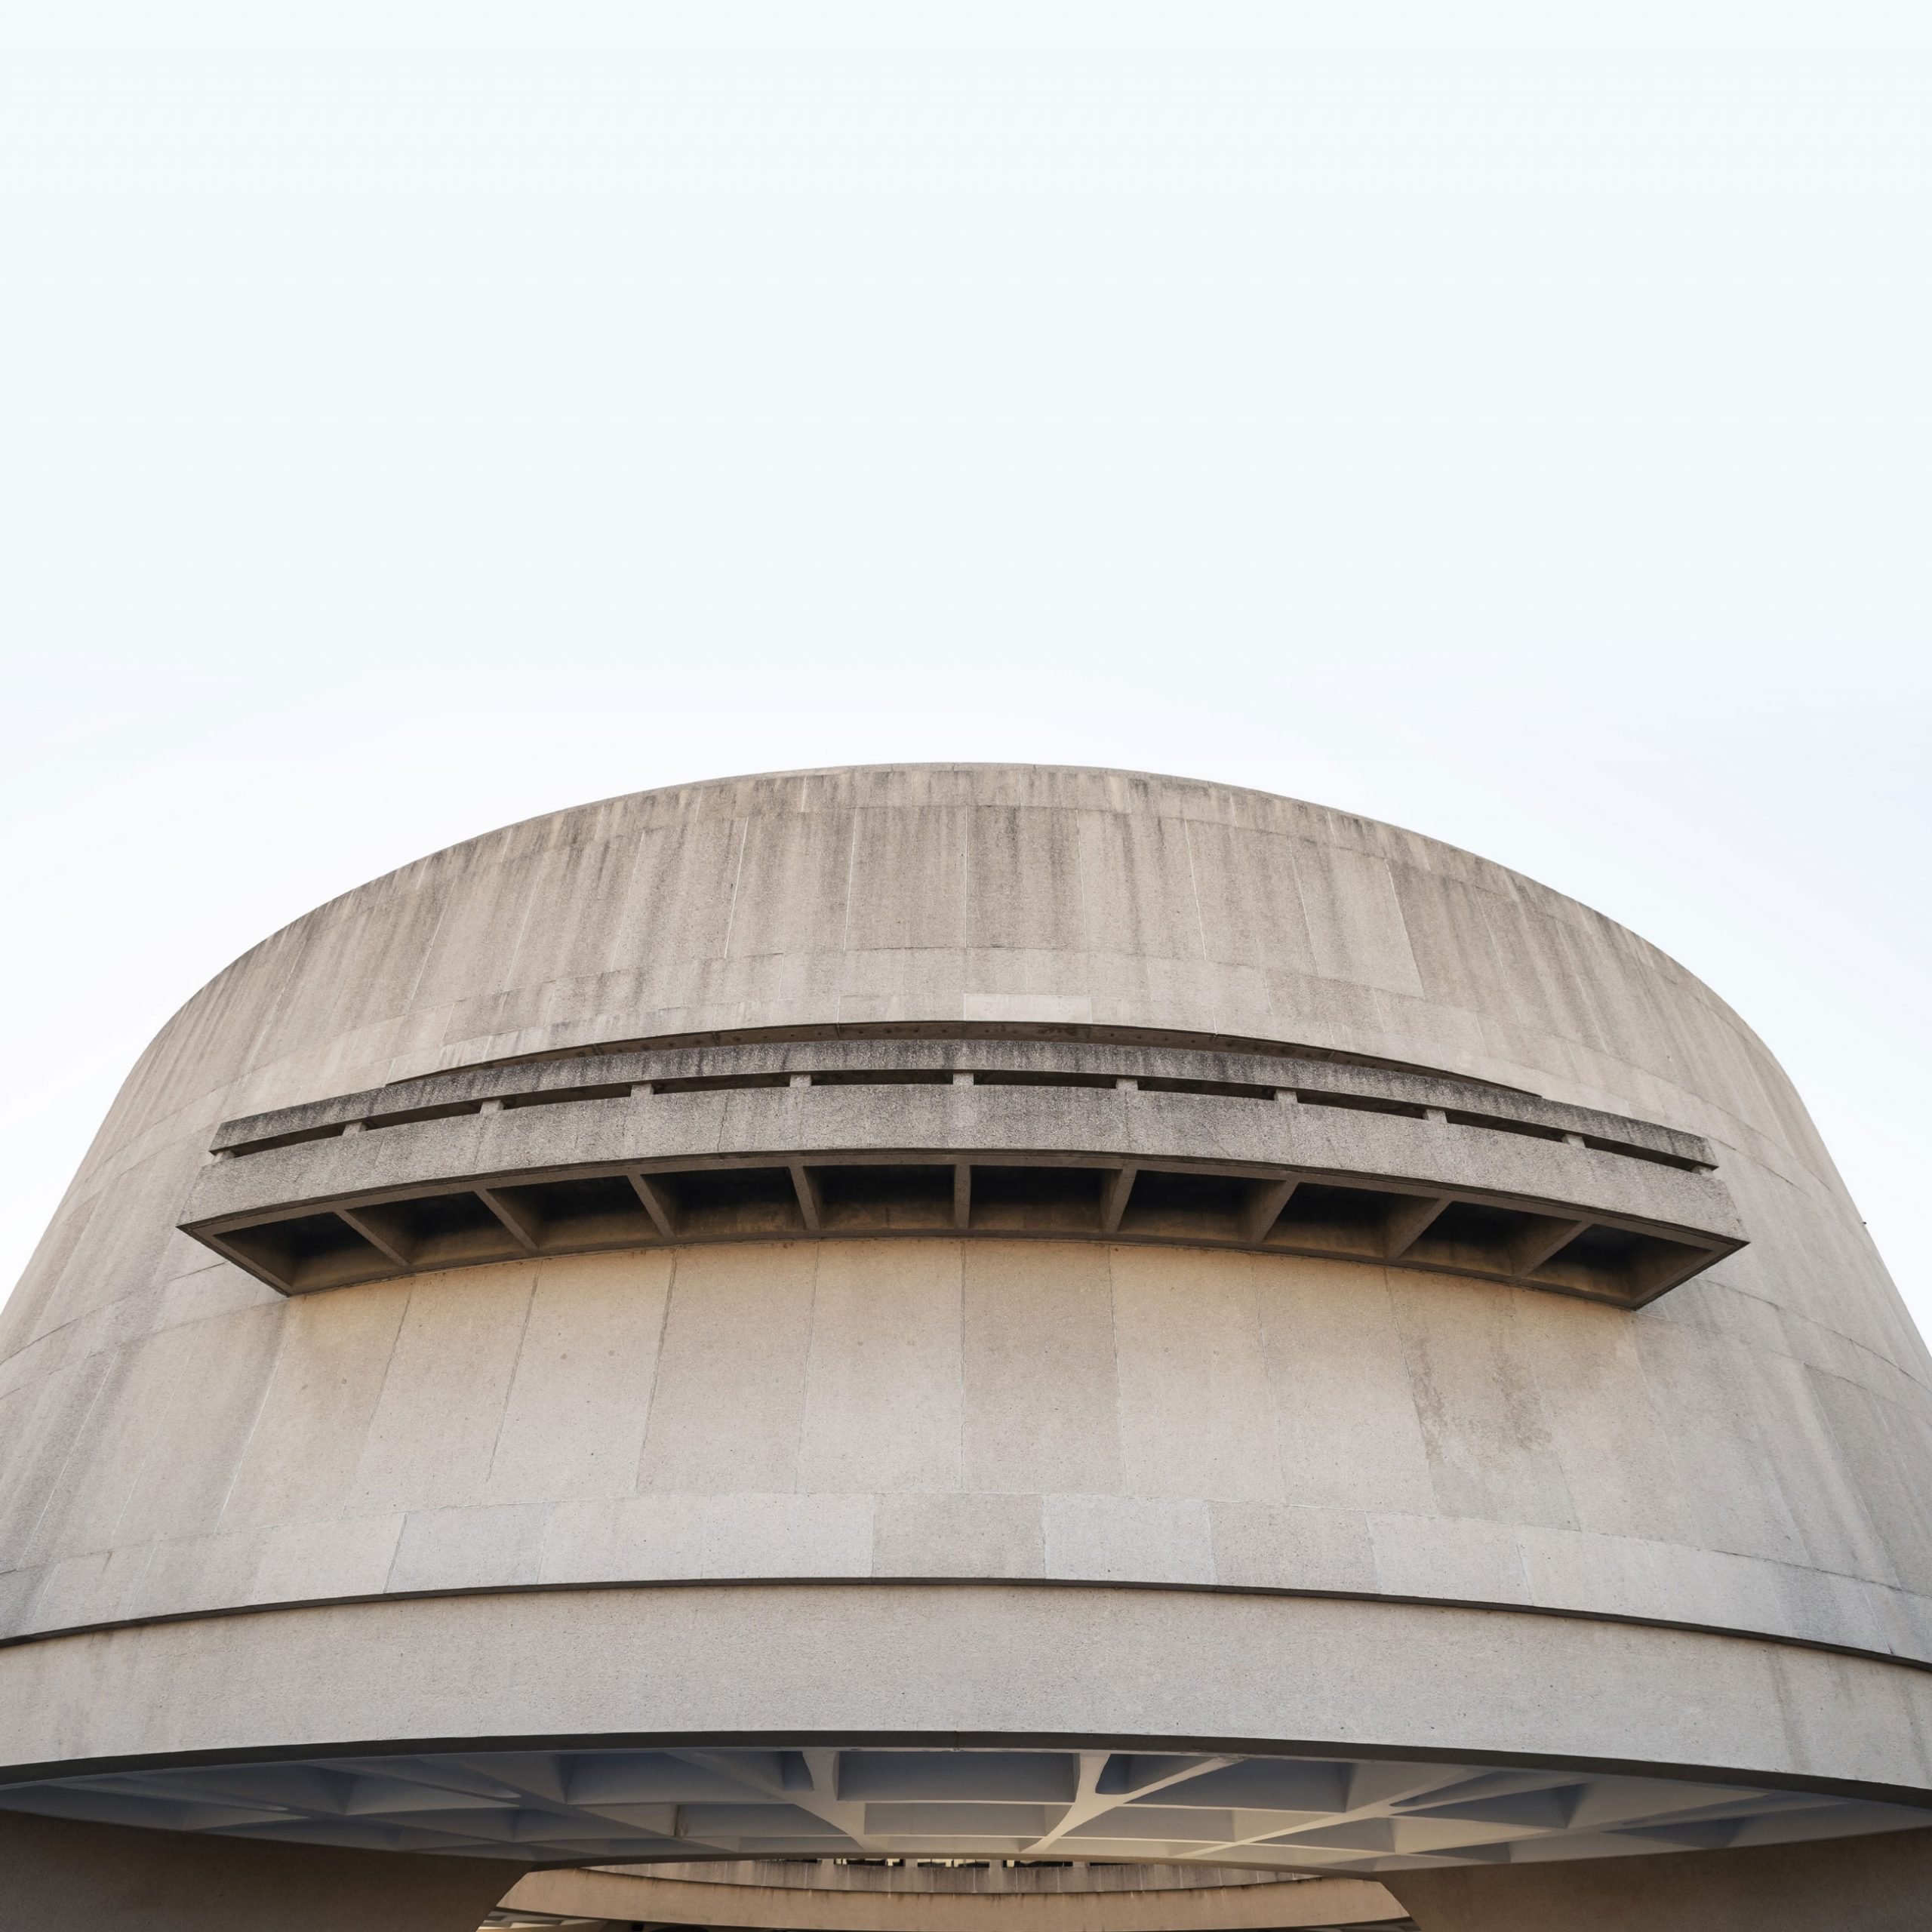 Hirshhorn Museum and Sculpture Garden is a Brutalist masterpiece home to nearly 12,000 works.